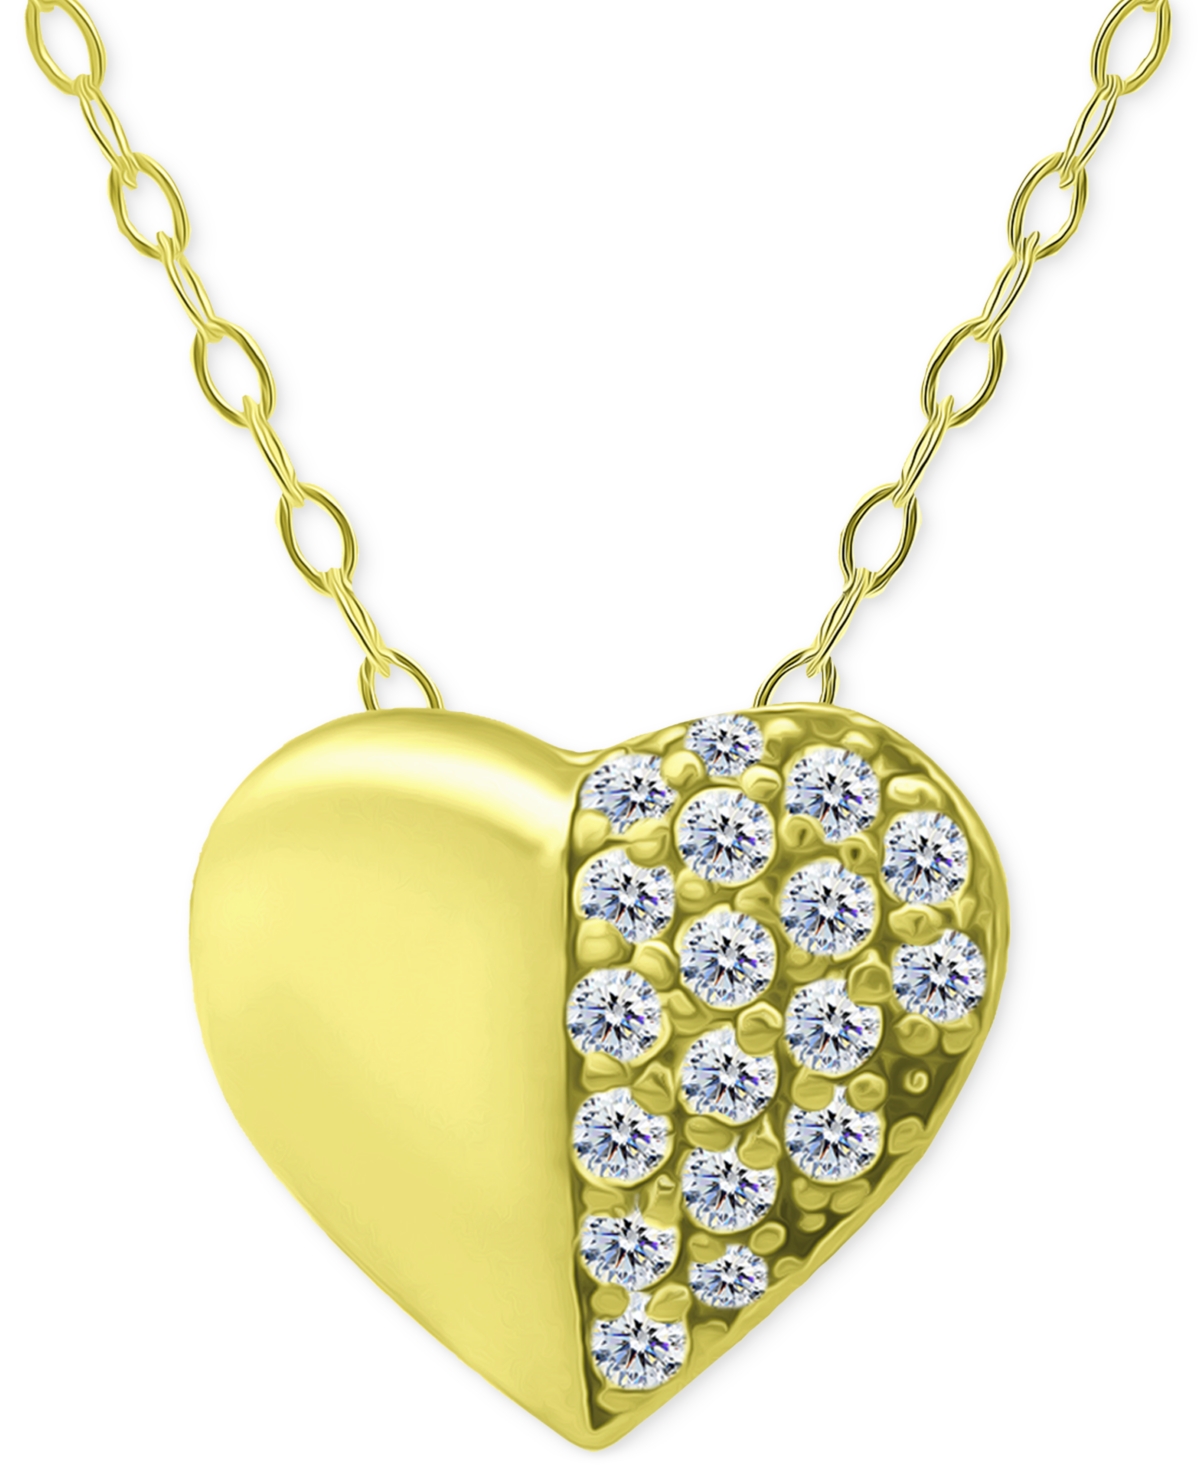 Giani Bernini Cubic Zirconia Pave Heart Pendant Necklace In 18k Gold-plated Sterling Silver, 16" + 2" Extender, Cr In Gold Over Silver